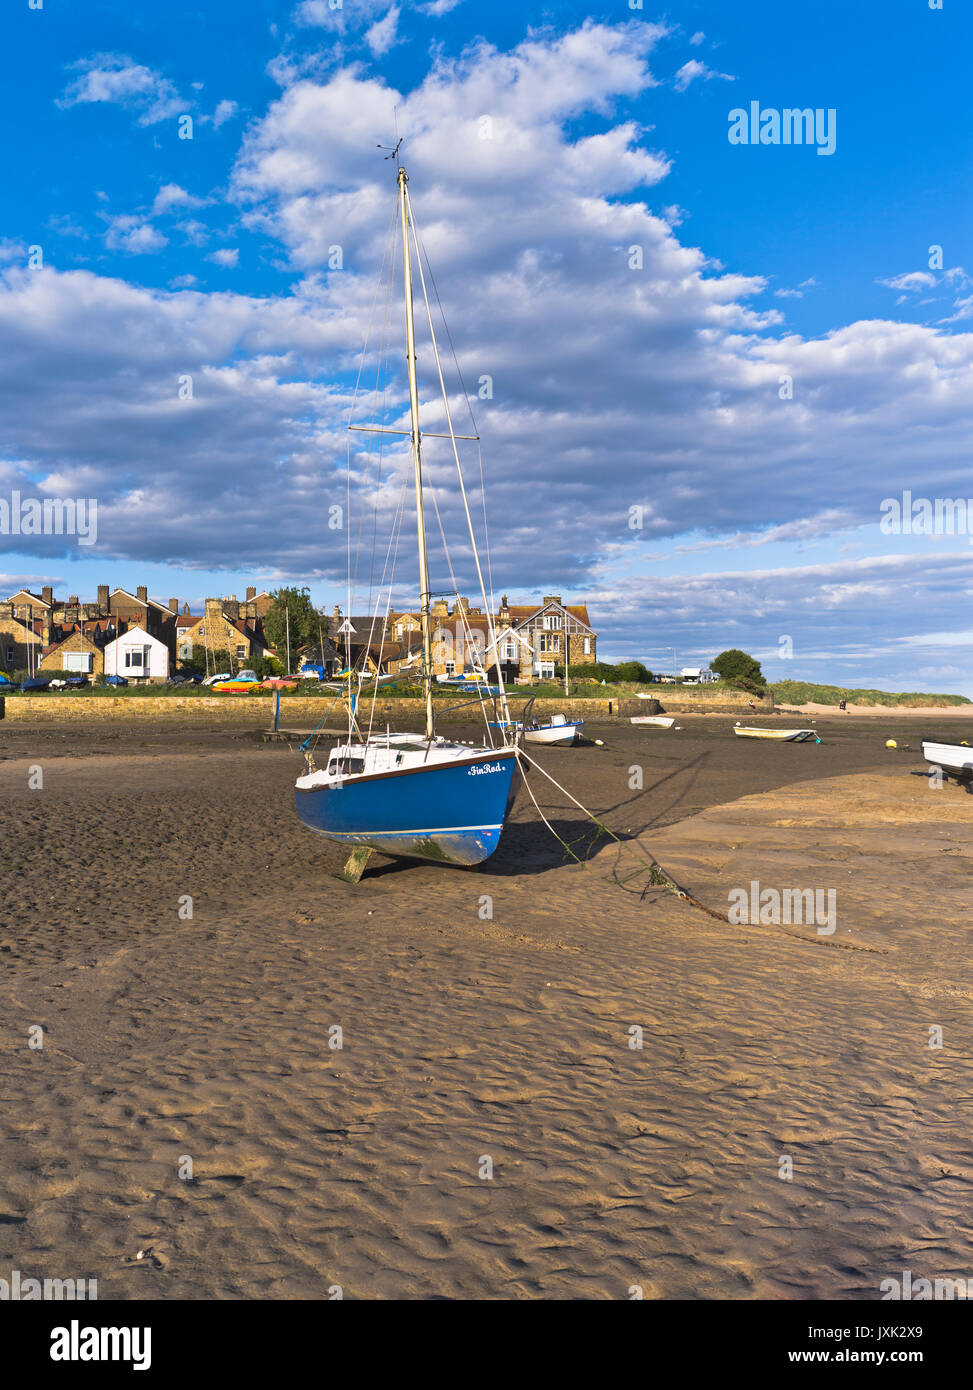 dh Northumbria anchorage england ALNMOUTH BAY NORTHUMBERLAND Yacht boat summer evening at anchor britain in ebb tide harbor east coast anchored uk Stock Photo